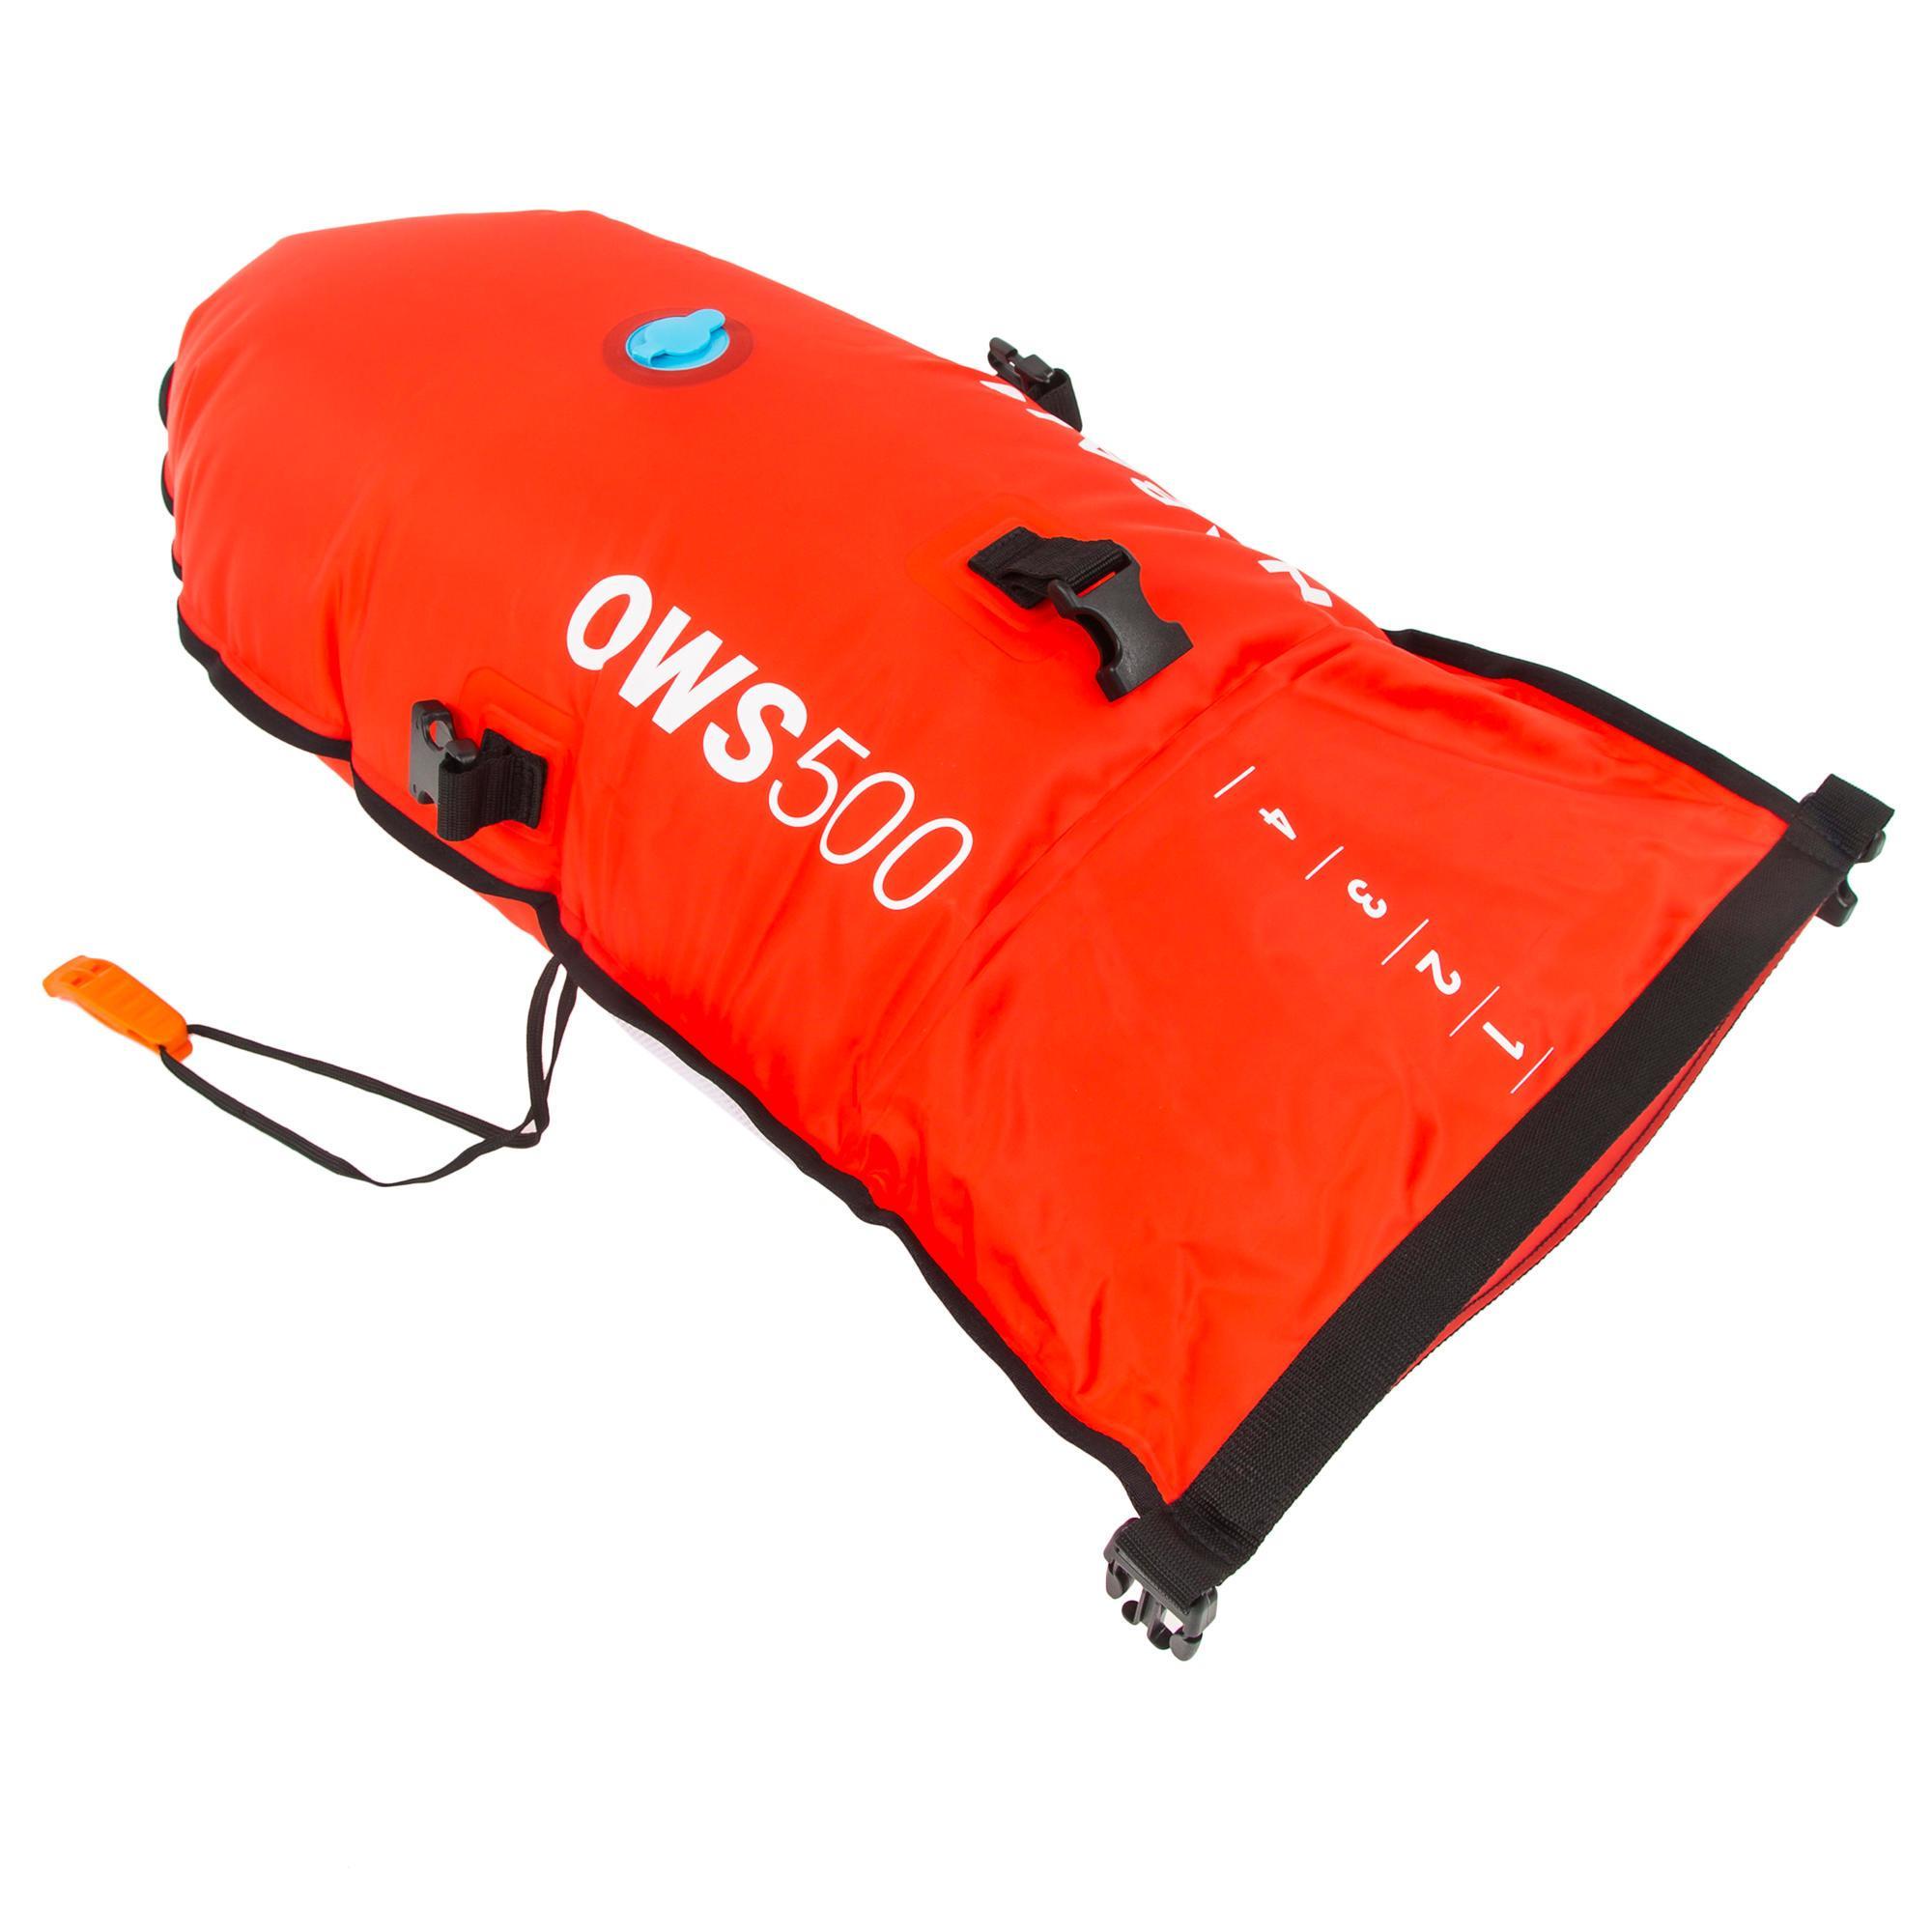 OWS 500 SWIM BUOY FOR USE IN OPEN WATER 